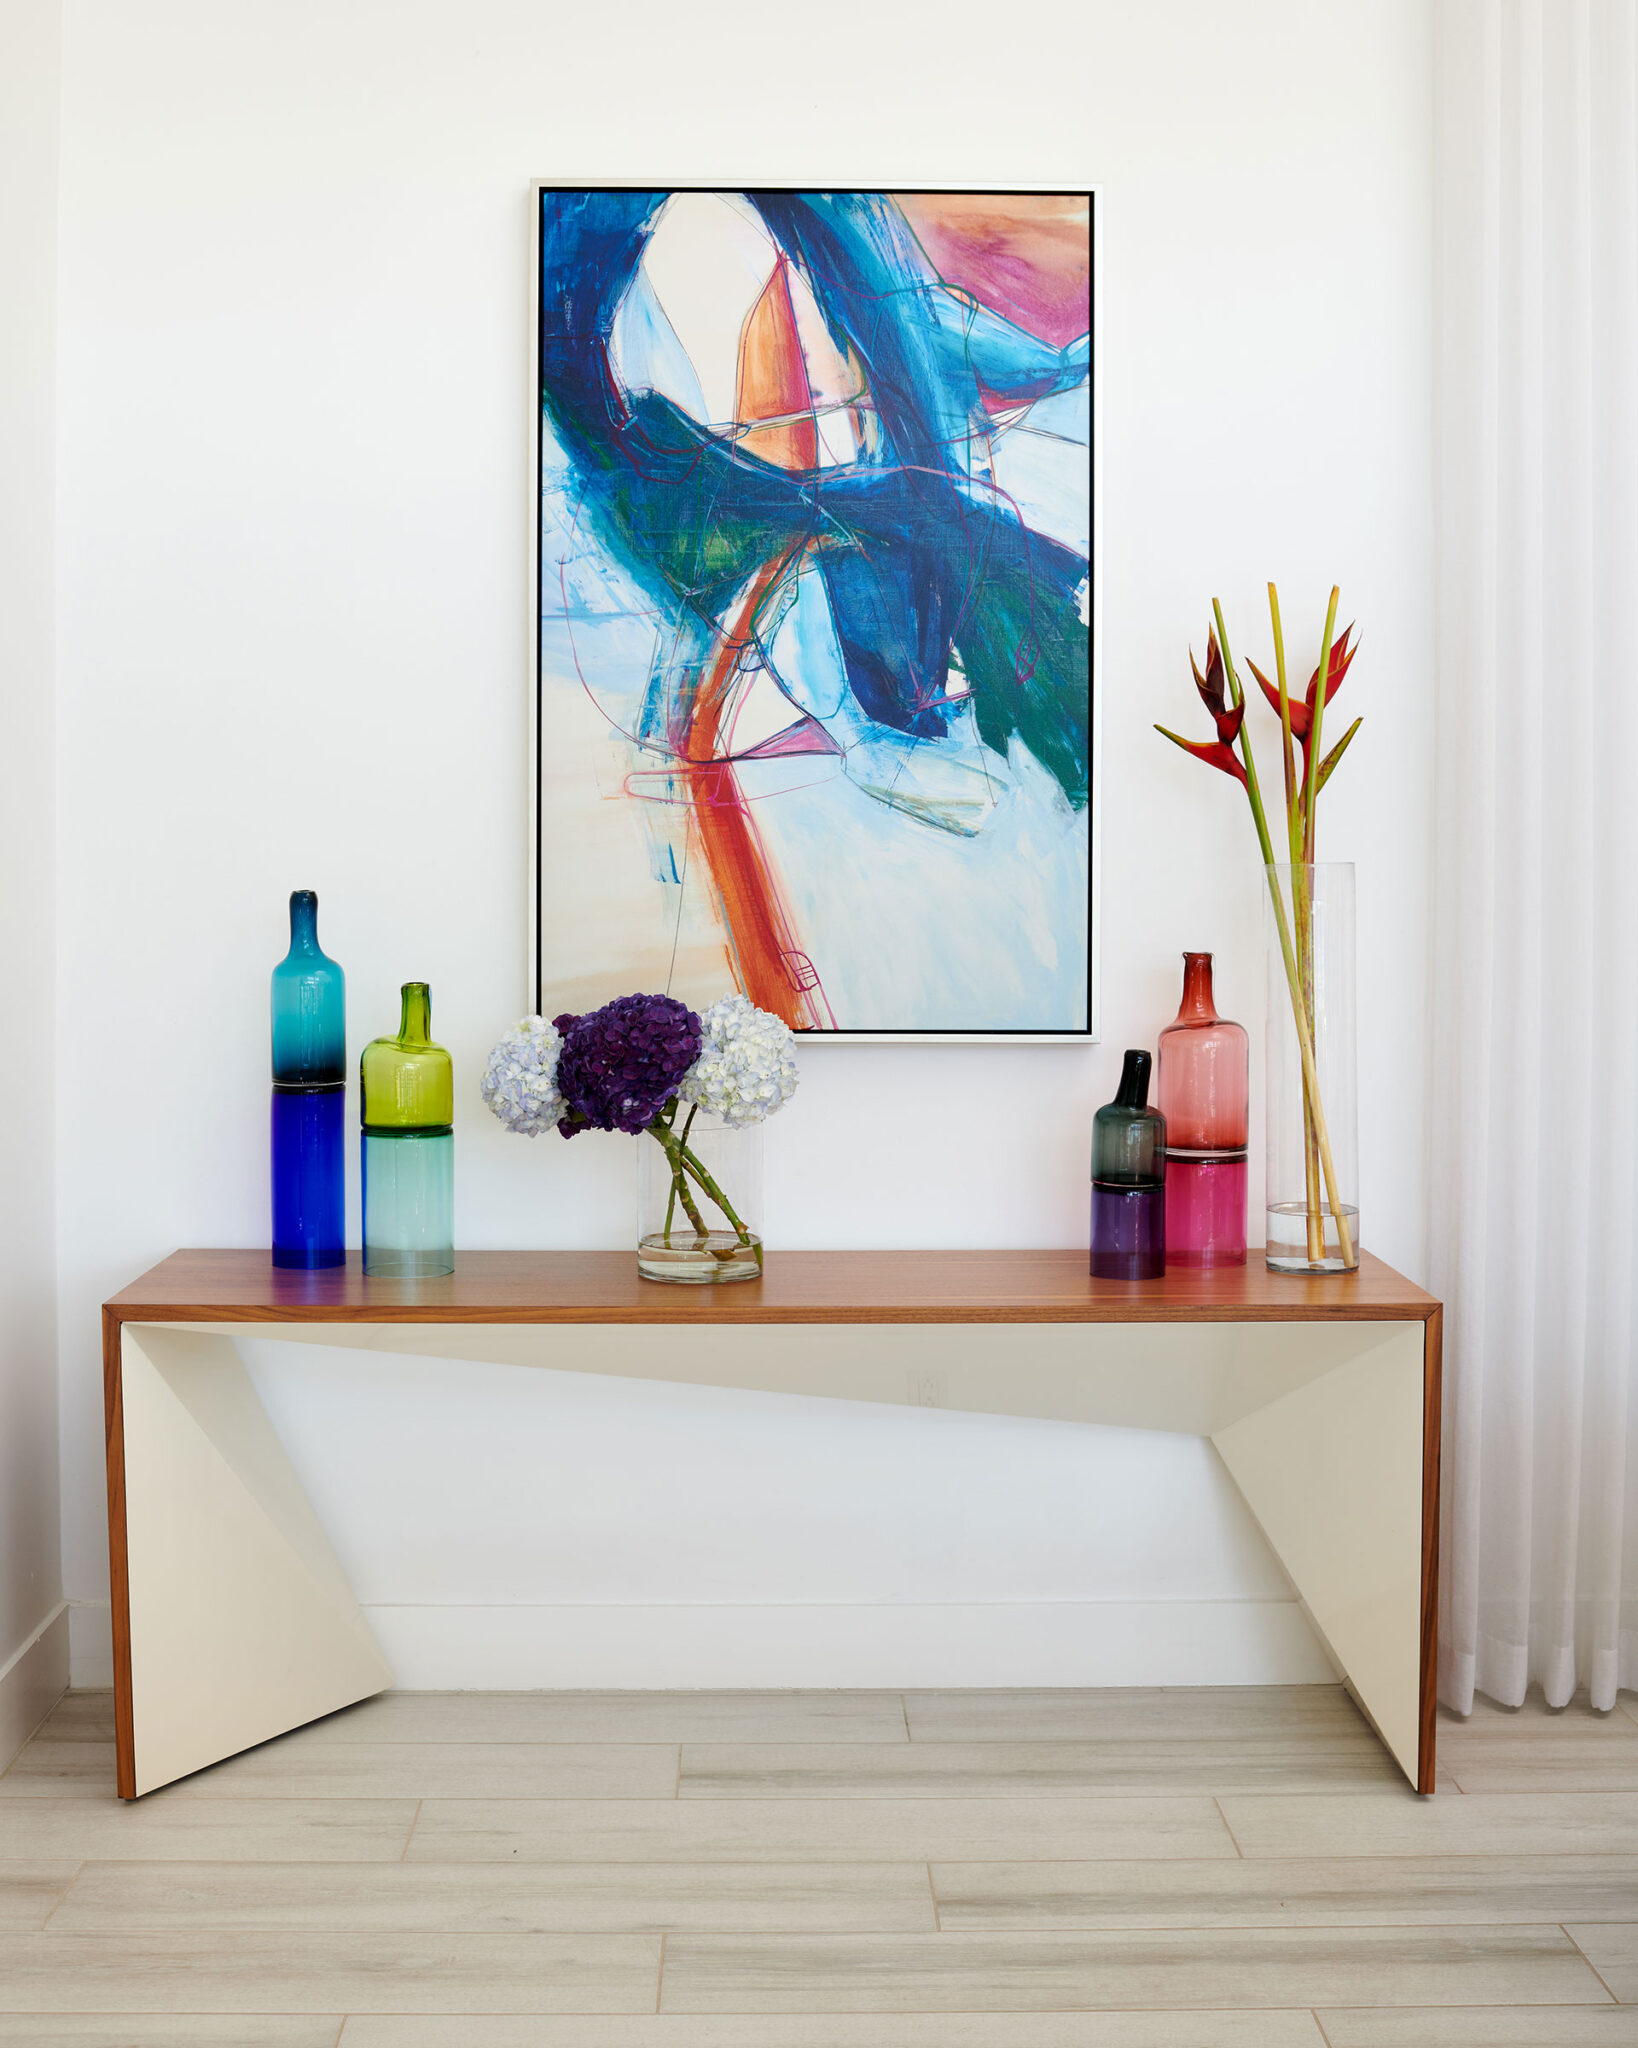 Console table with colorful glass art and an abstract painting on the wall